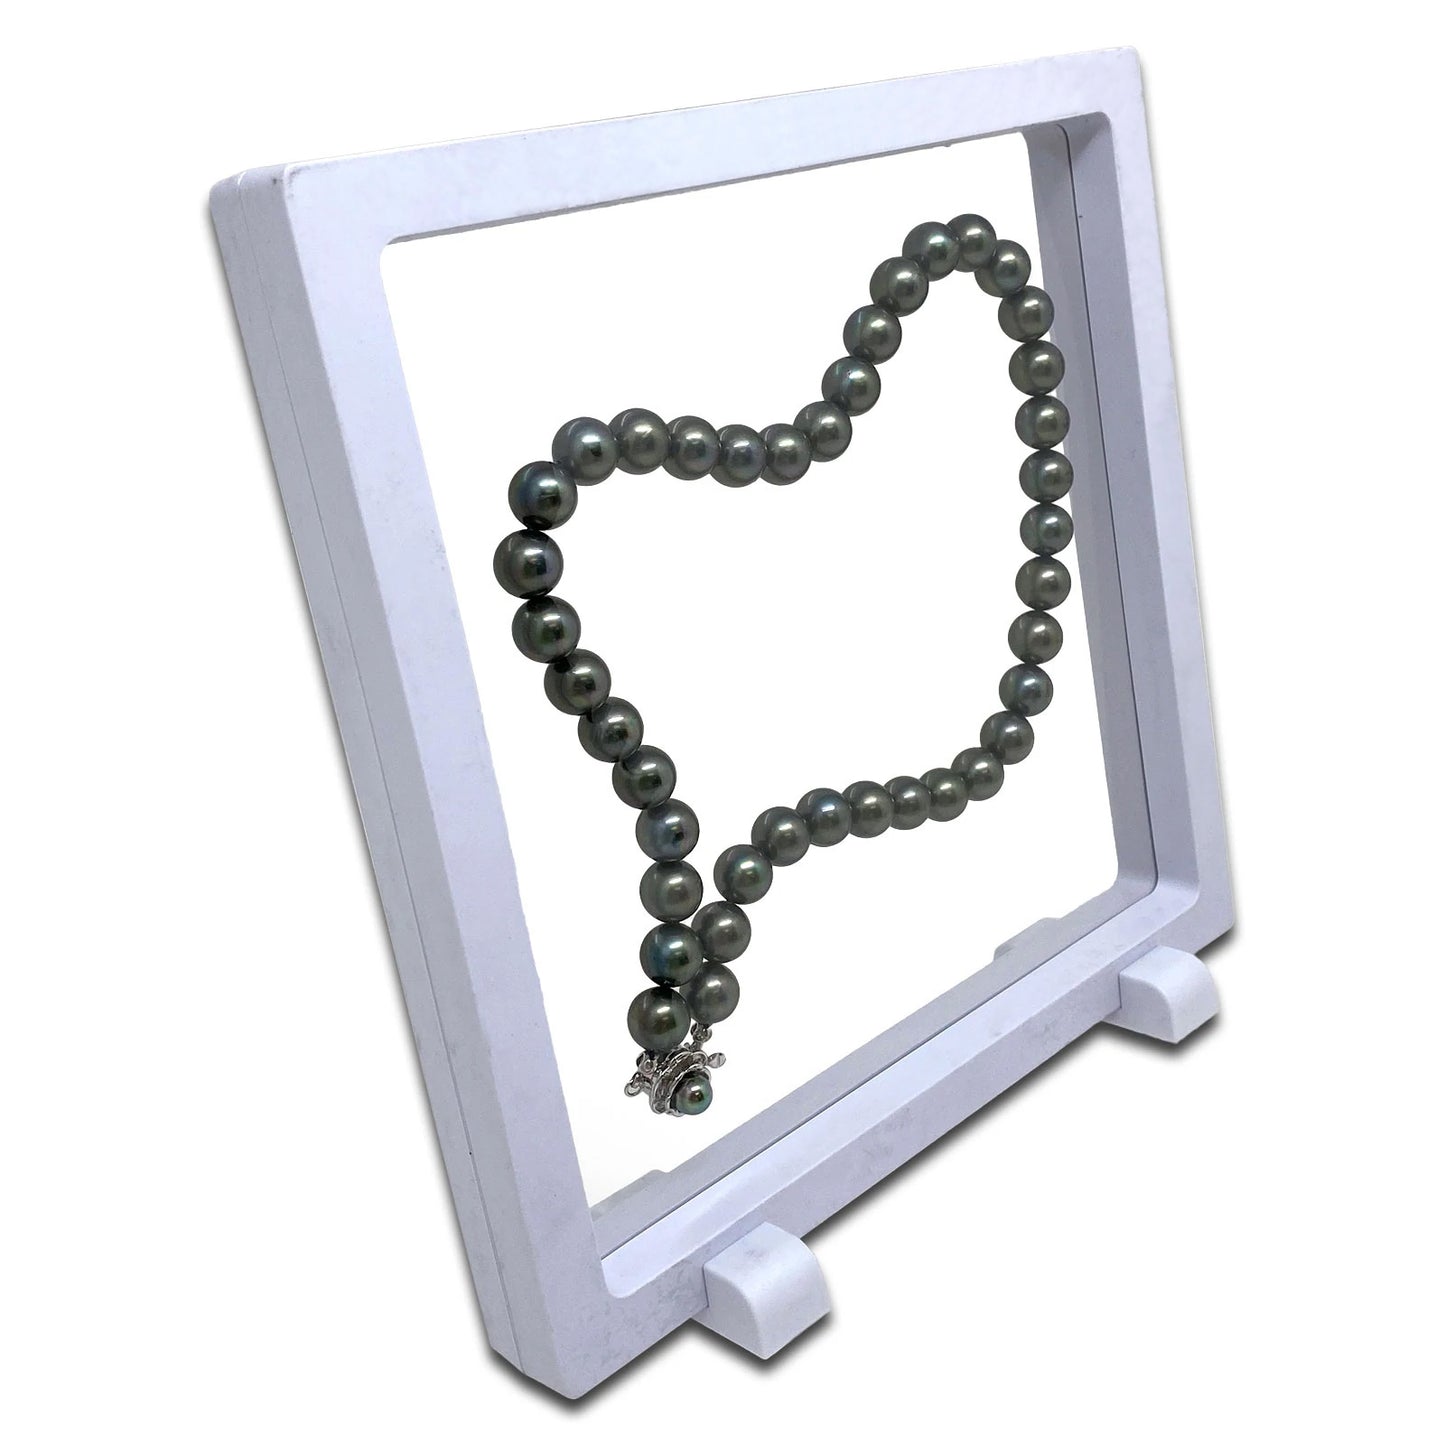 7" x 7" White Floating Frame Jewelry Display Case